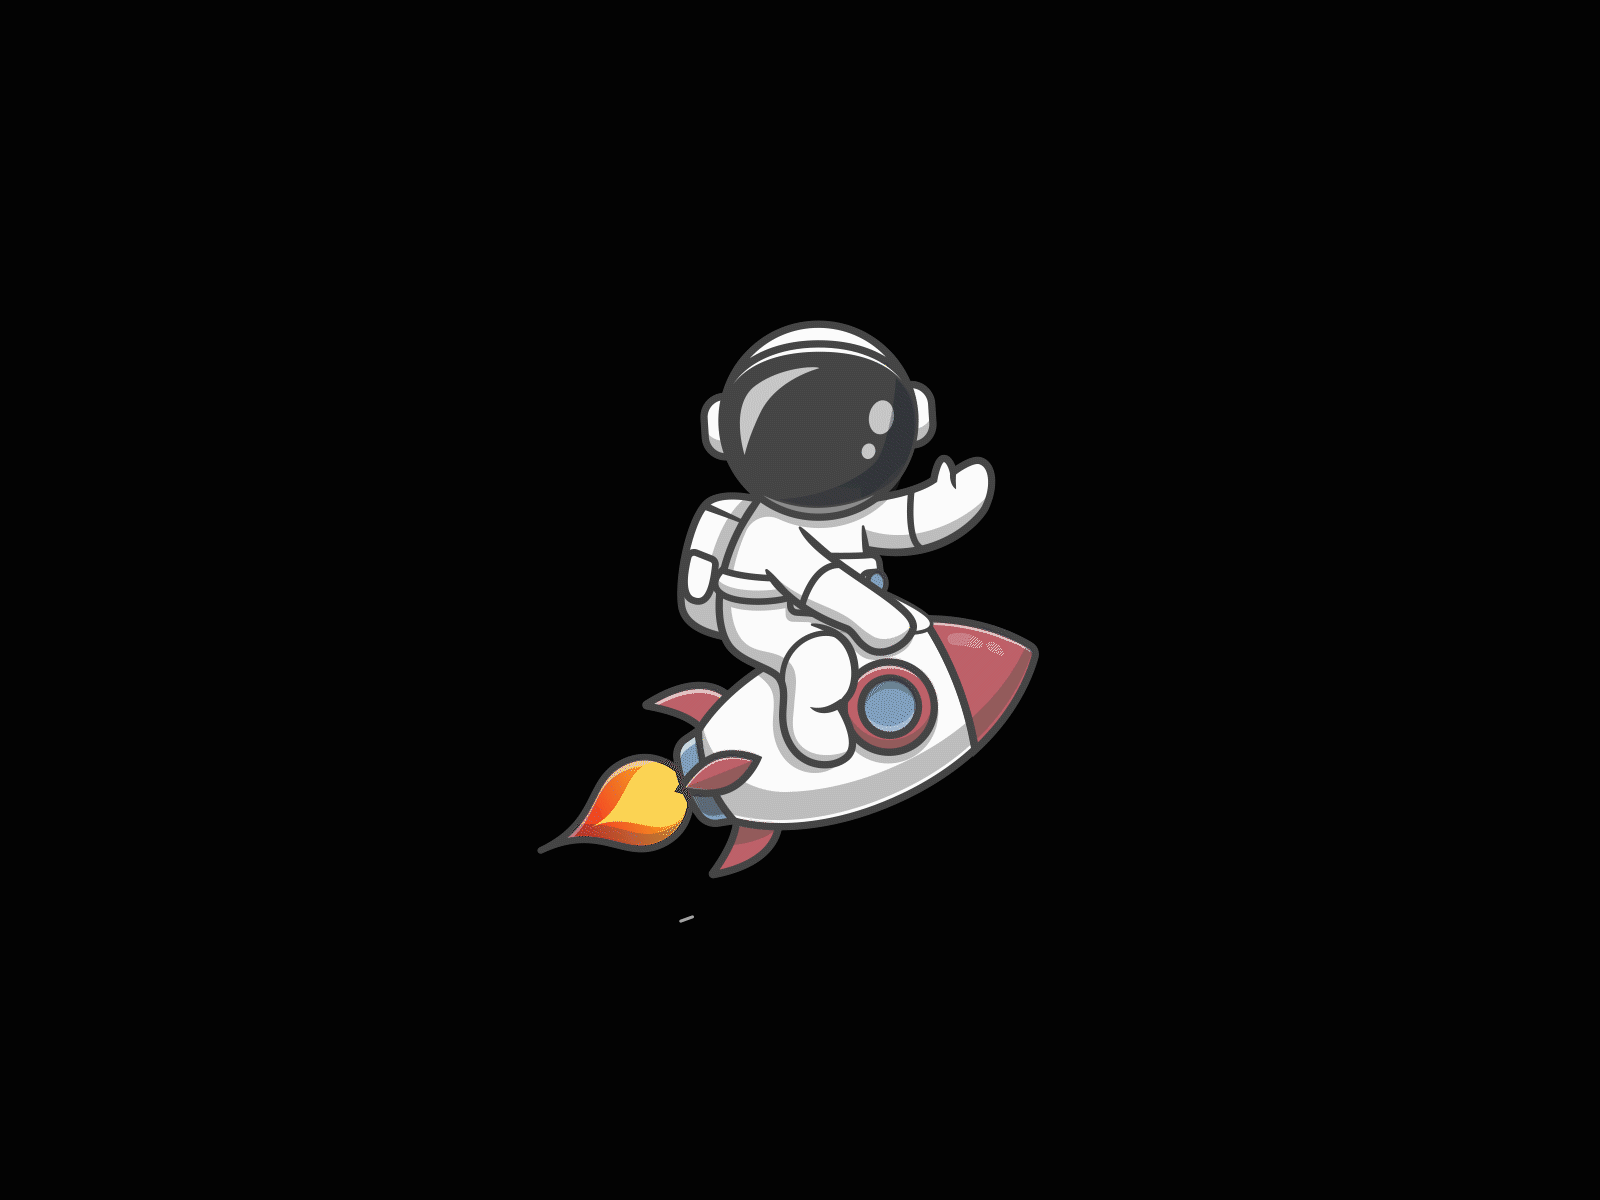 Astronaut is riding the rocket astronaut is riding a rocket is riding a rocket lottie animation motion graphics